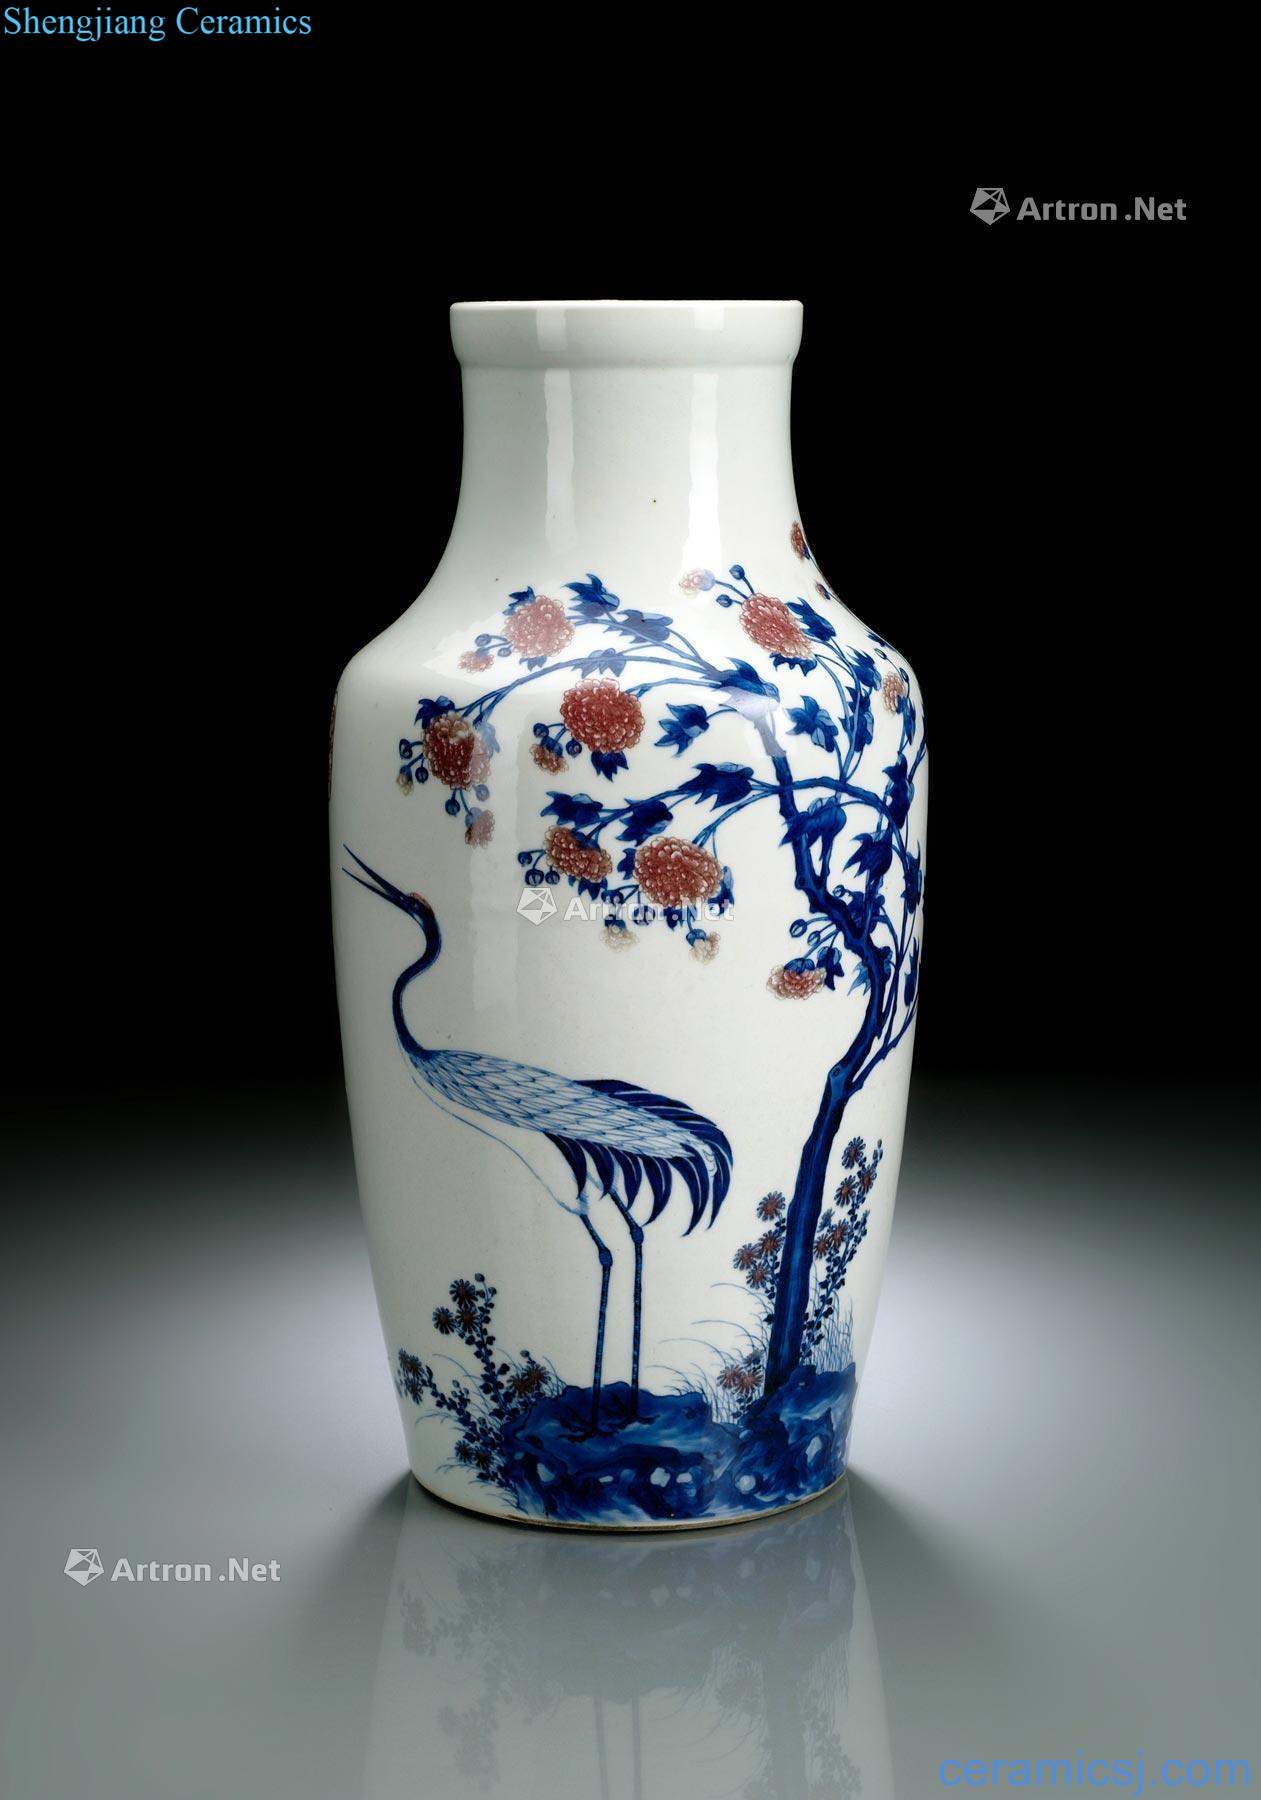 In the 18th century qing Blue and white youligong day post prosperous live figure bottles